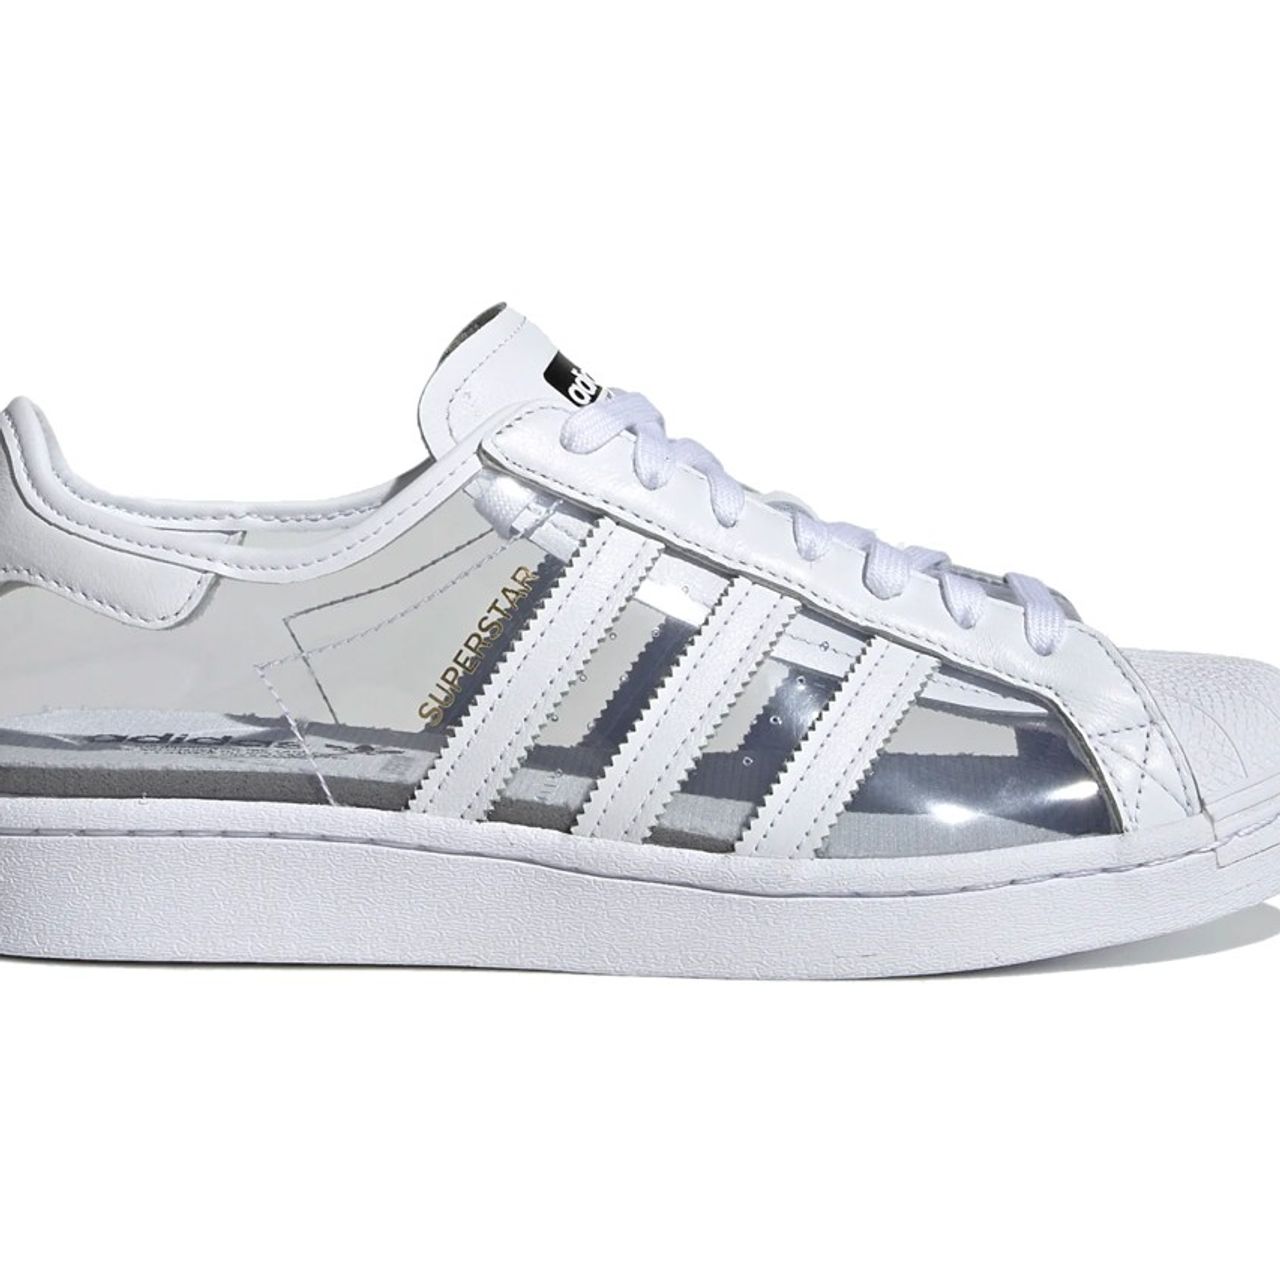 Adidas Superstar Skate Shoes Are Made For Comfort